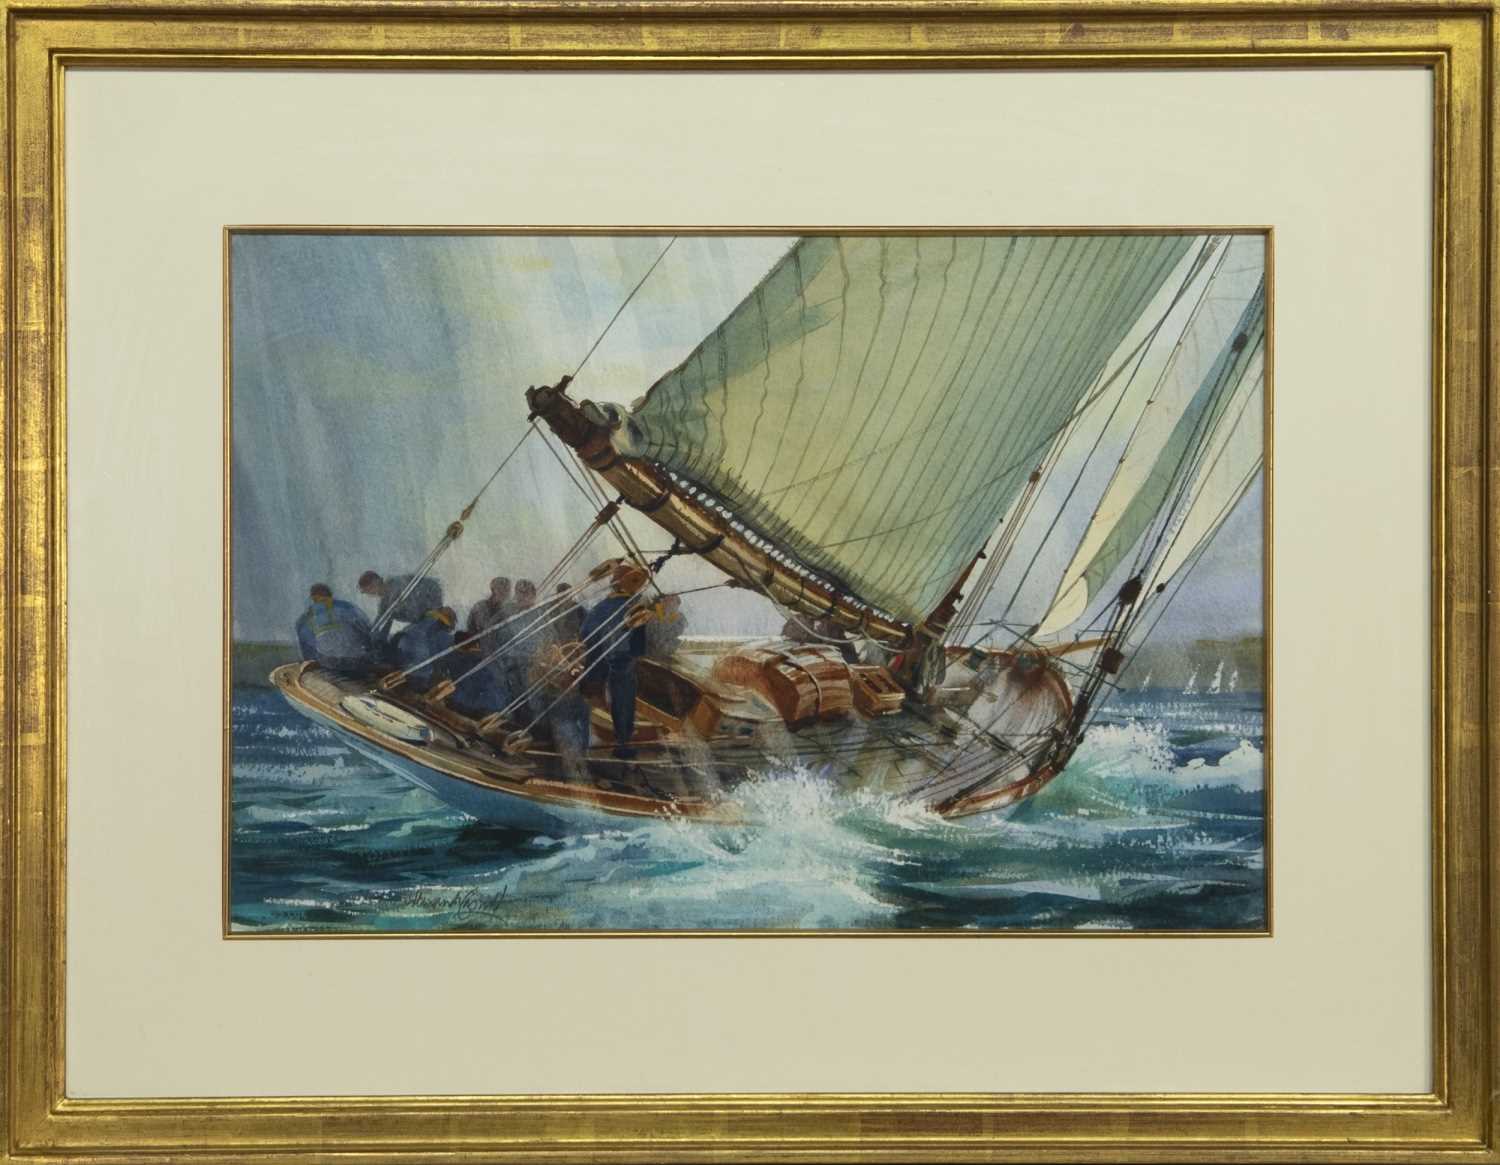 Lot 549 - MARIQUITA IN A SQUALL OFF FALMOUTH, A WATERCOLOUR BY ALEXANDER CRESWELL